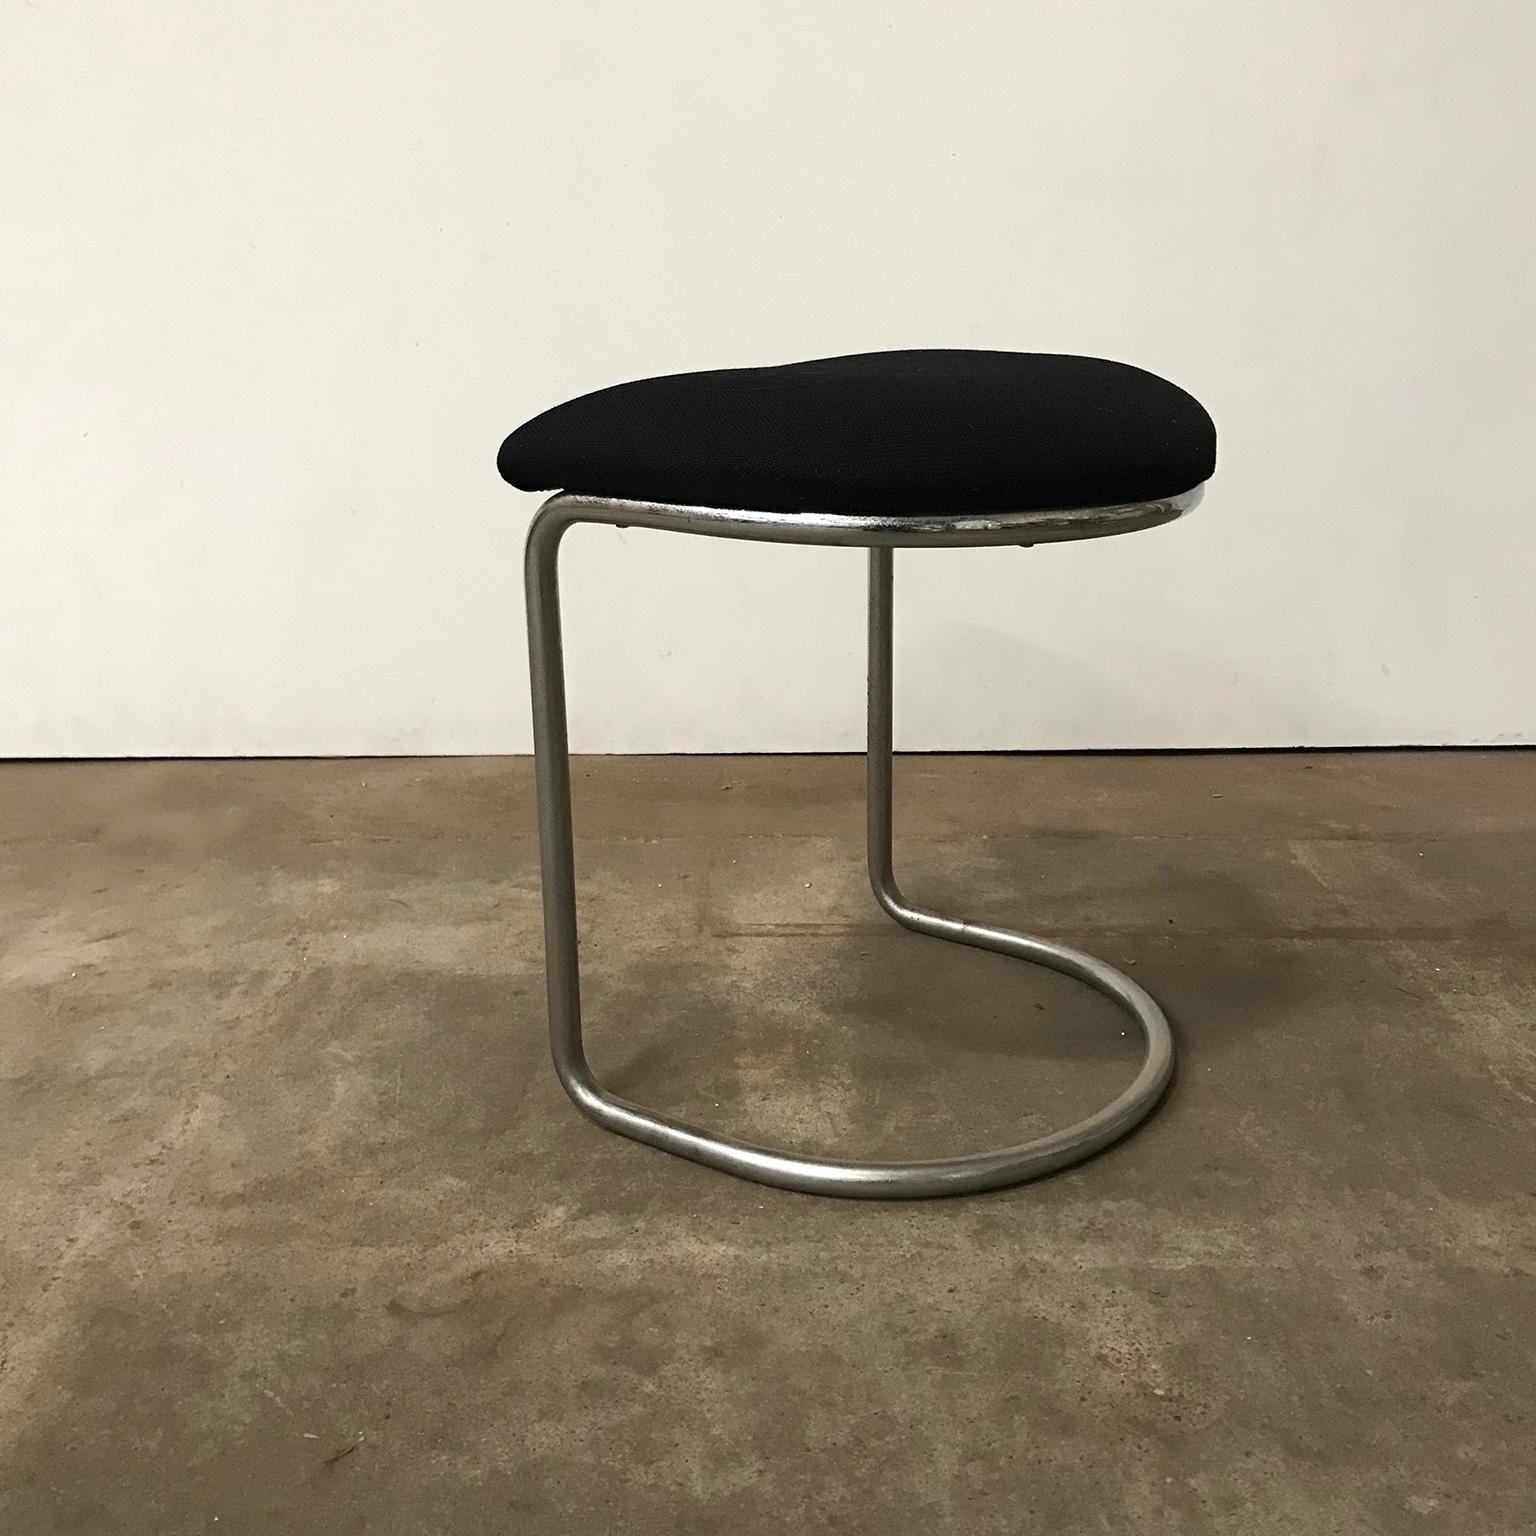 Dutch W.H. Gispen for Gispen, for Make Up Tabouret in Chrome and Black, circa 1930 For Sale